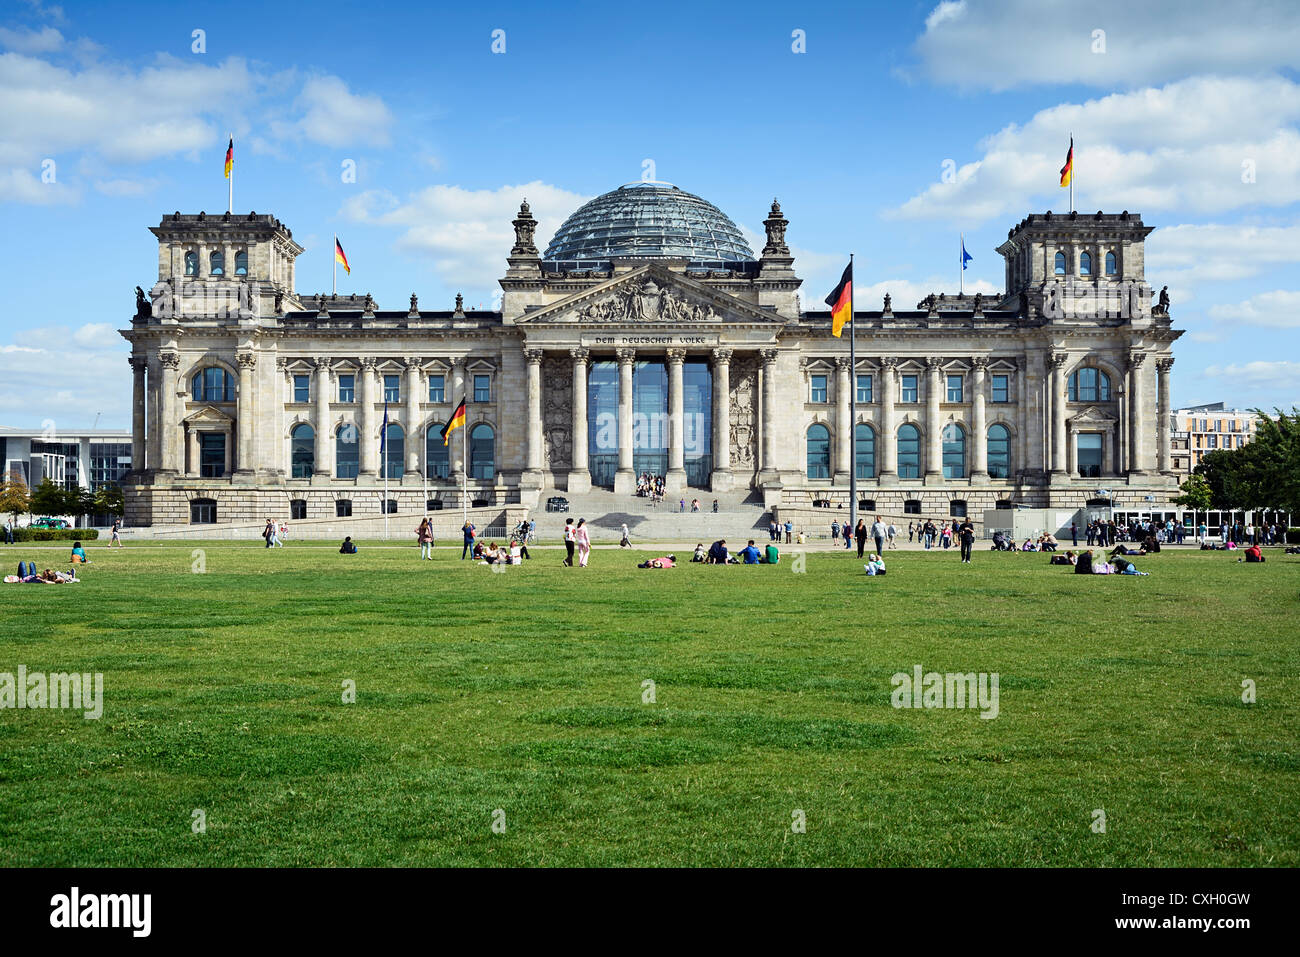 Reichstag building, home of the german parliament, Berlin, Germany, Europe Stock Photo